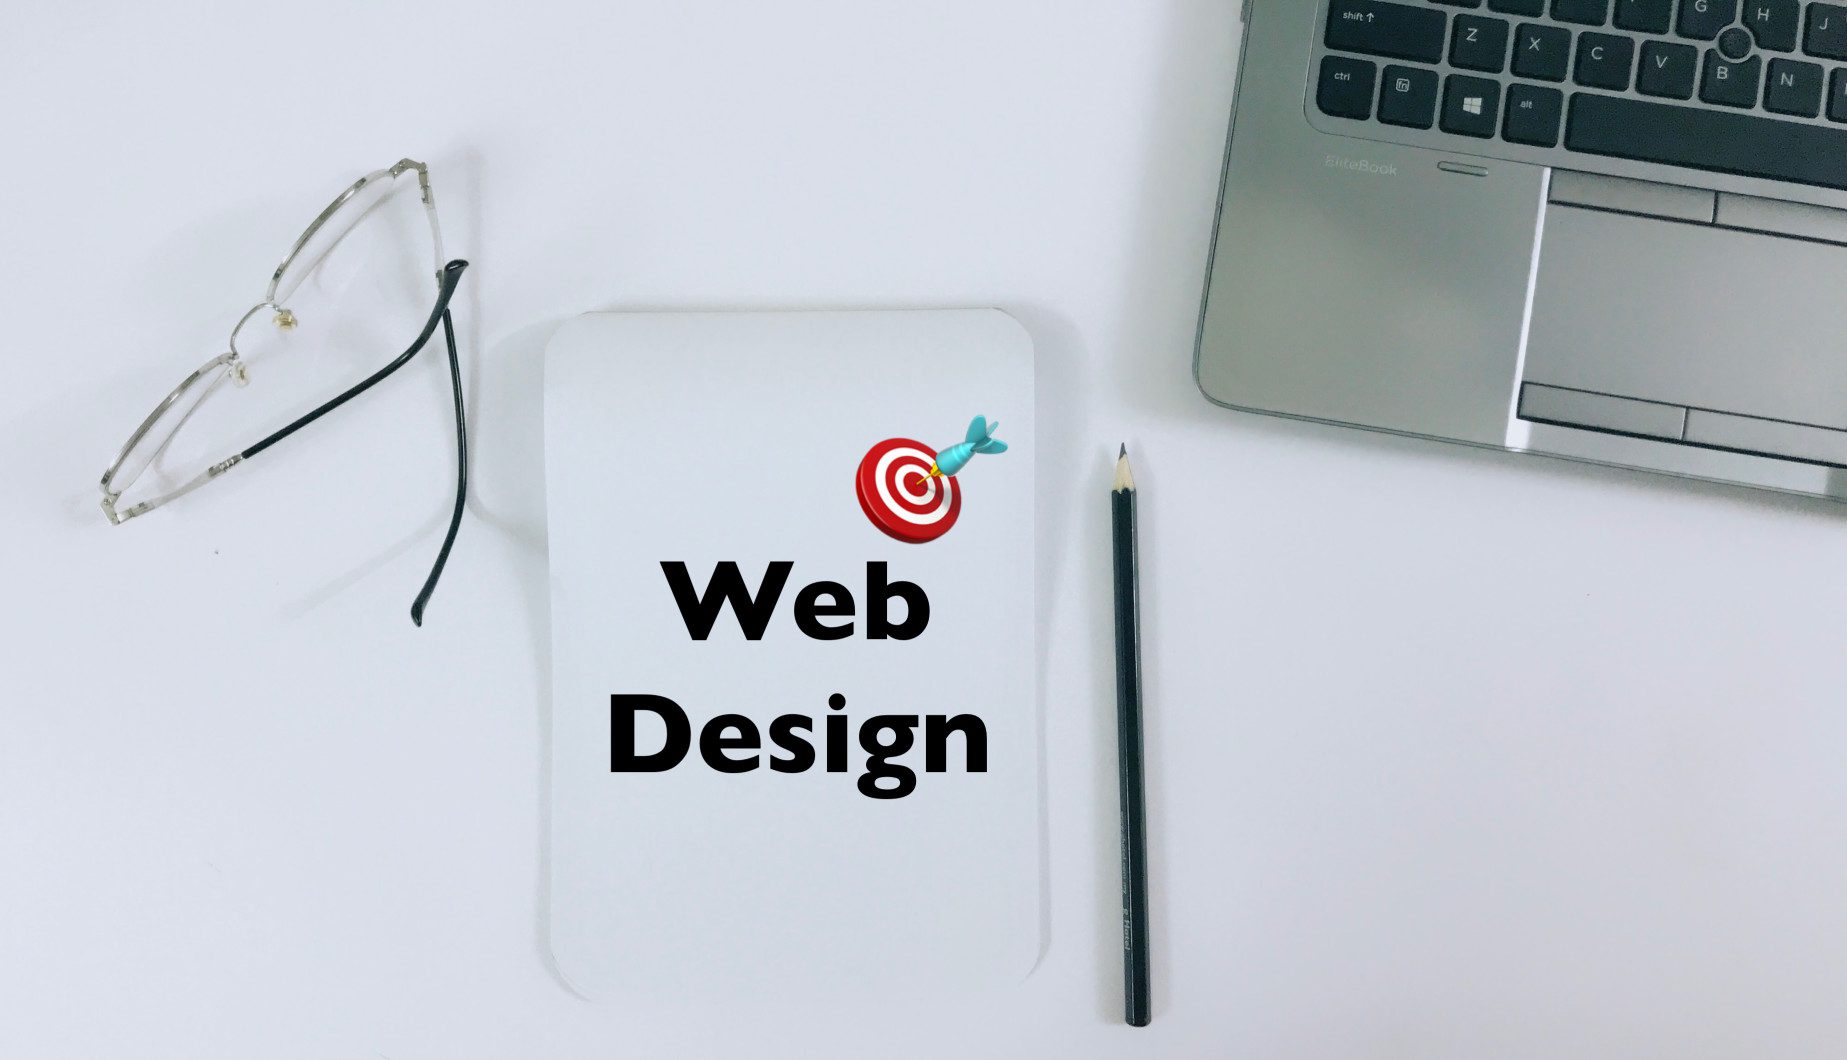 Which item is most important for a successful website design?